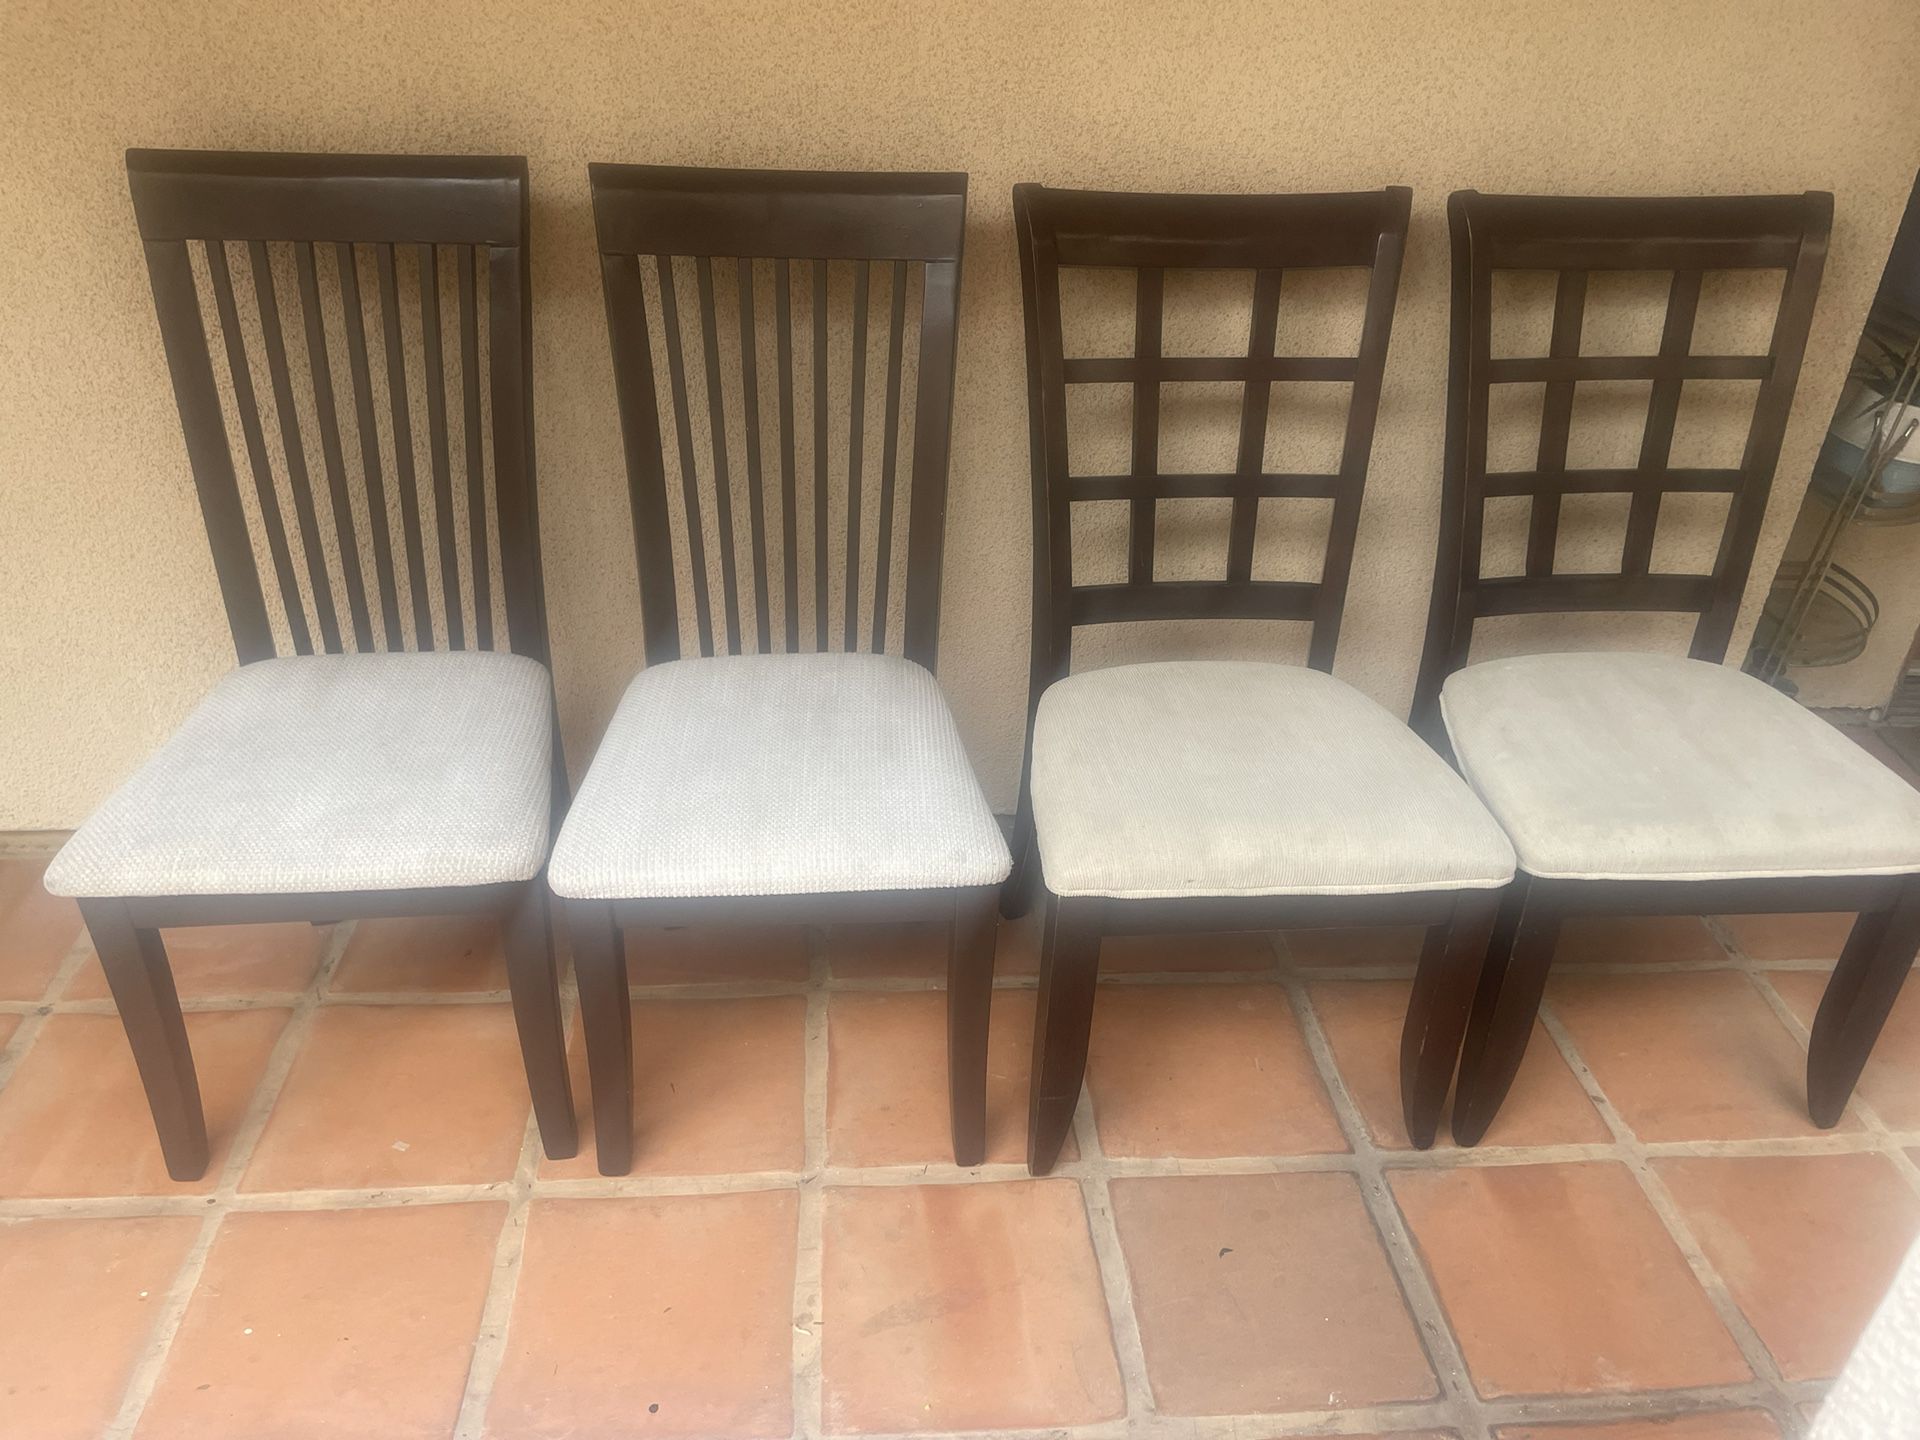 4 Chairs For $ 40 Dolares 